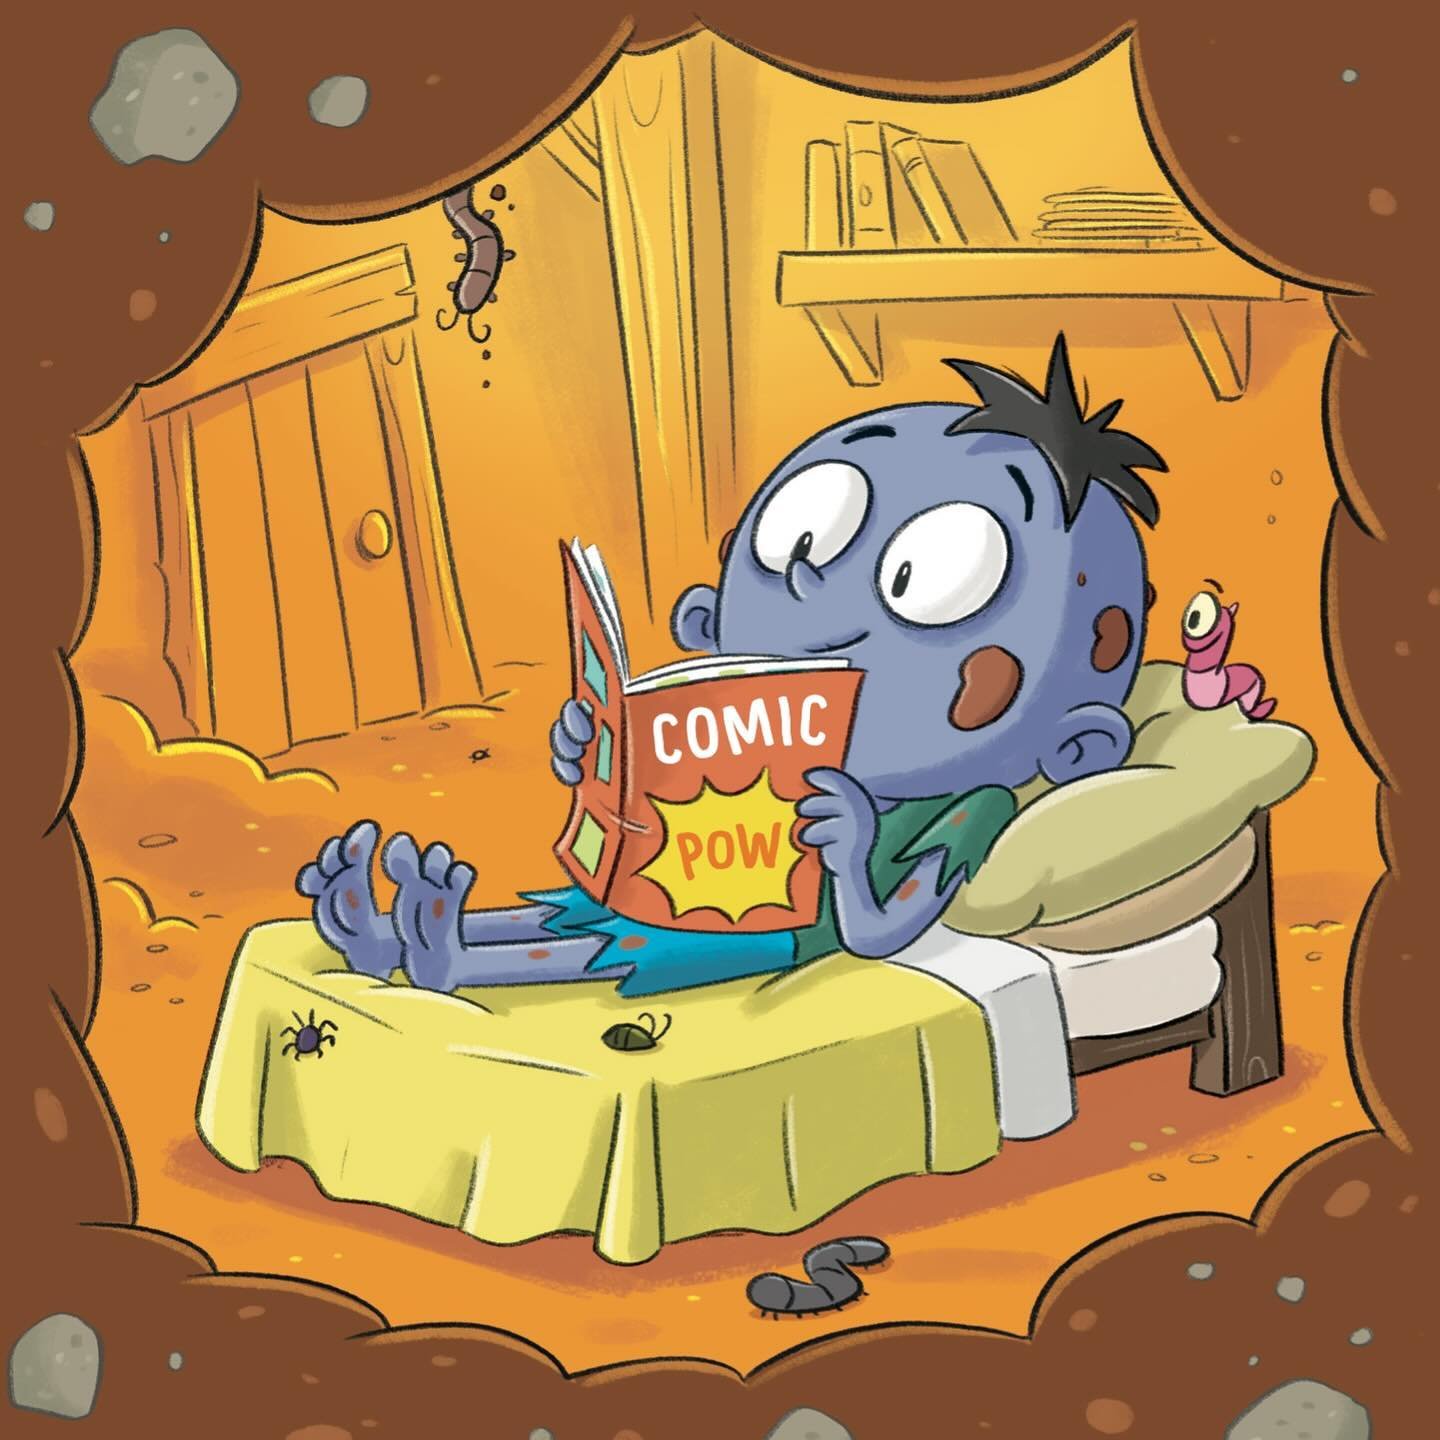 Incoming monster alert!

Zorro loves to munch on bugs. The only problem is they have some ..achem&hellip; unfortunate side effects.

&ldquo;Zorro&rsquo;s Tasty Treat&rdquo; is book 19 in the School of Monsters series and is released on June 5th along